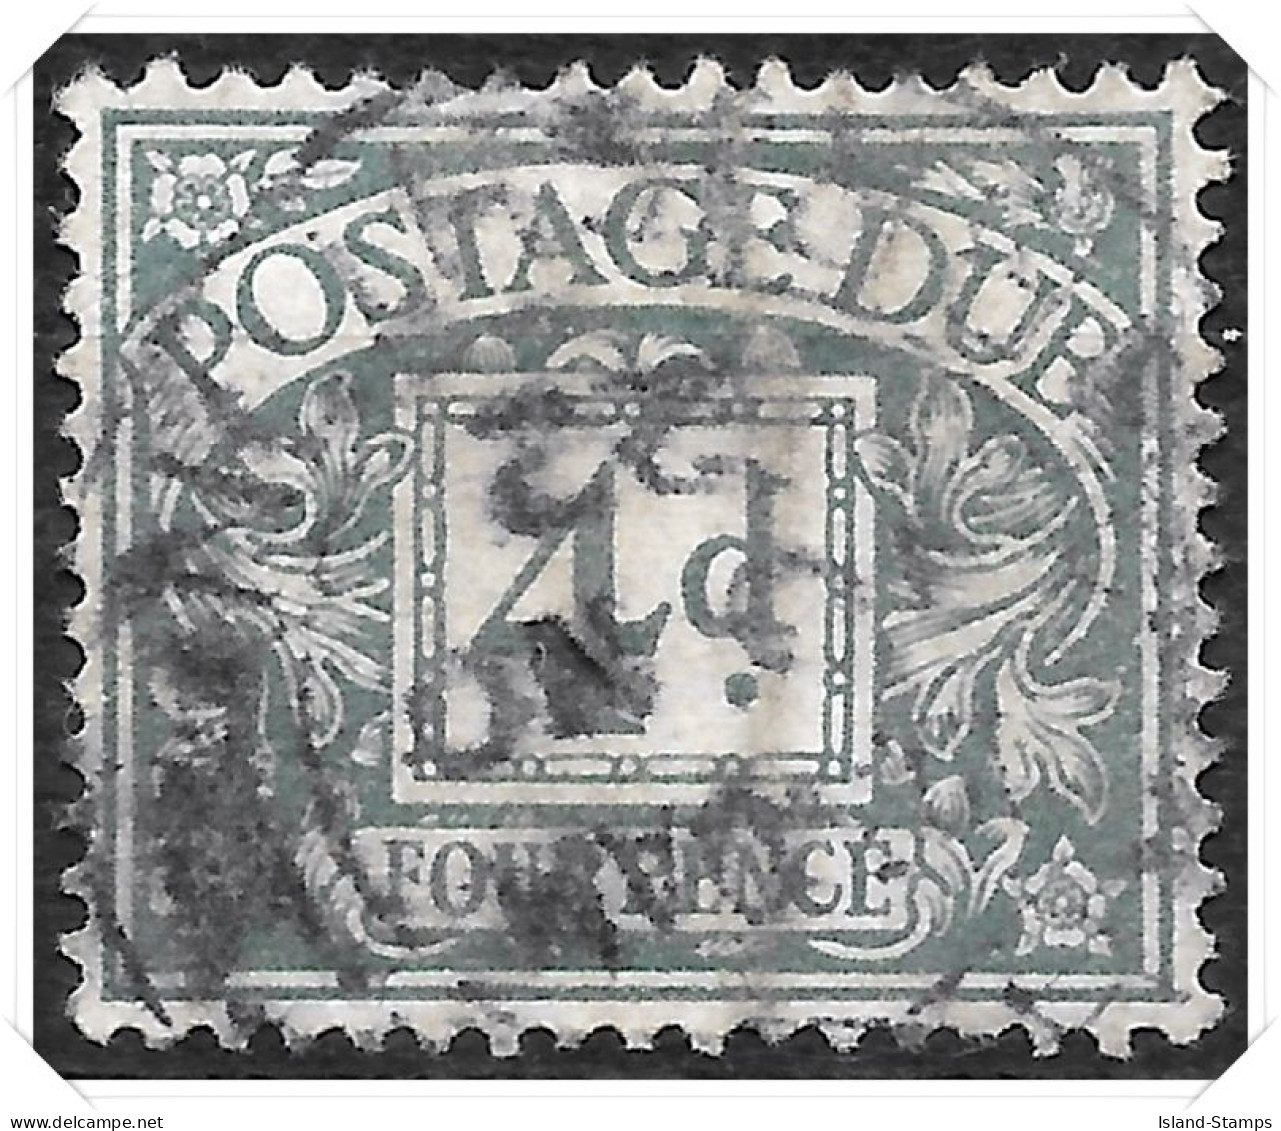 D6 1914 Royal Cypher Postage Dues 4d Dull Grey Green Used Hrd2-d - Tasse